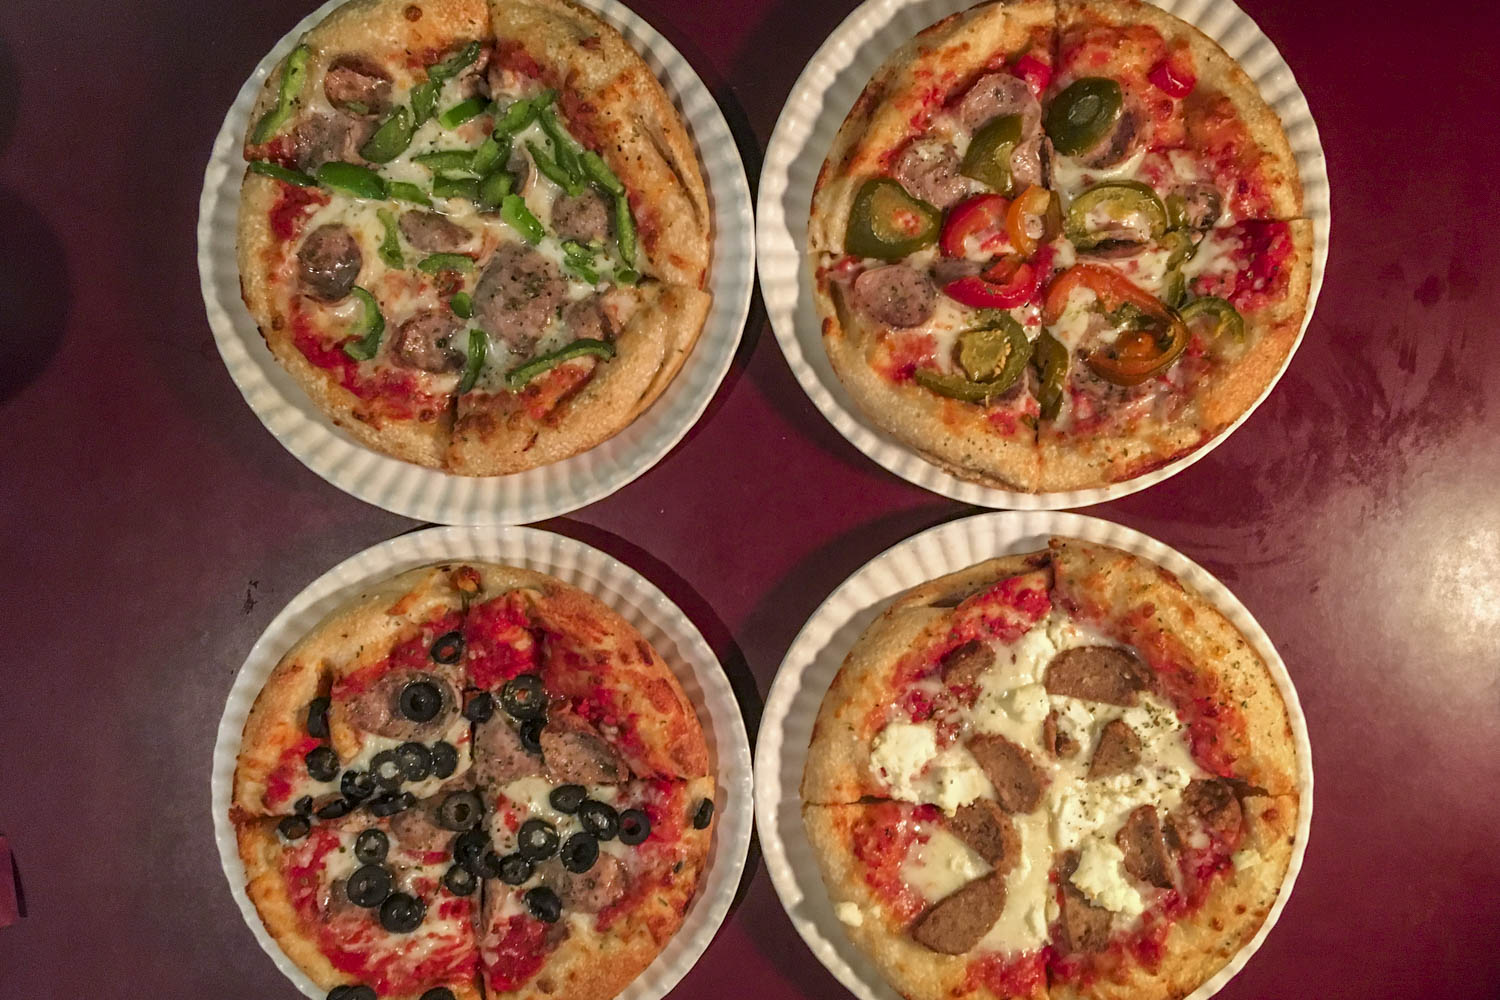 Various kinds of pizza on paper plates